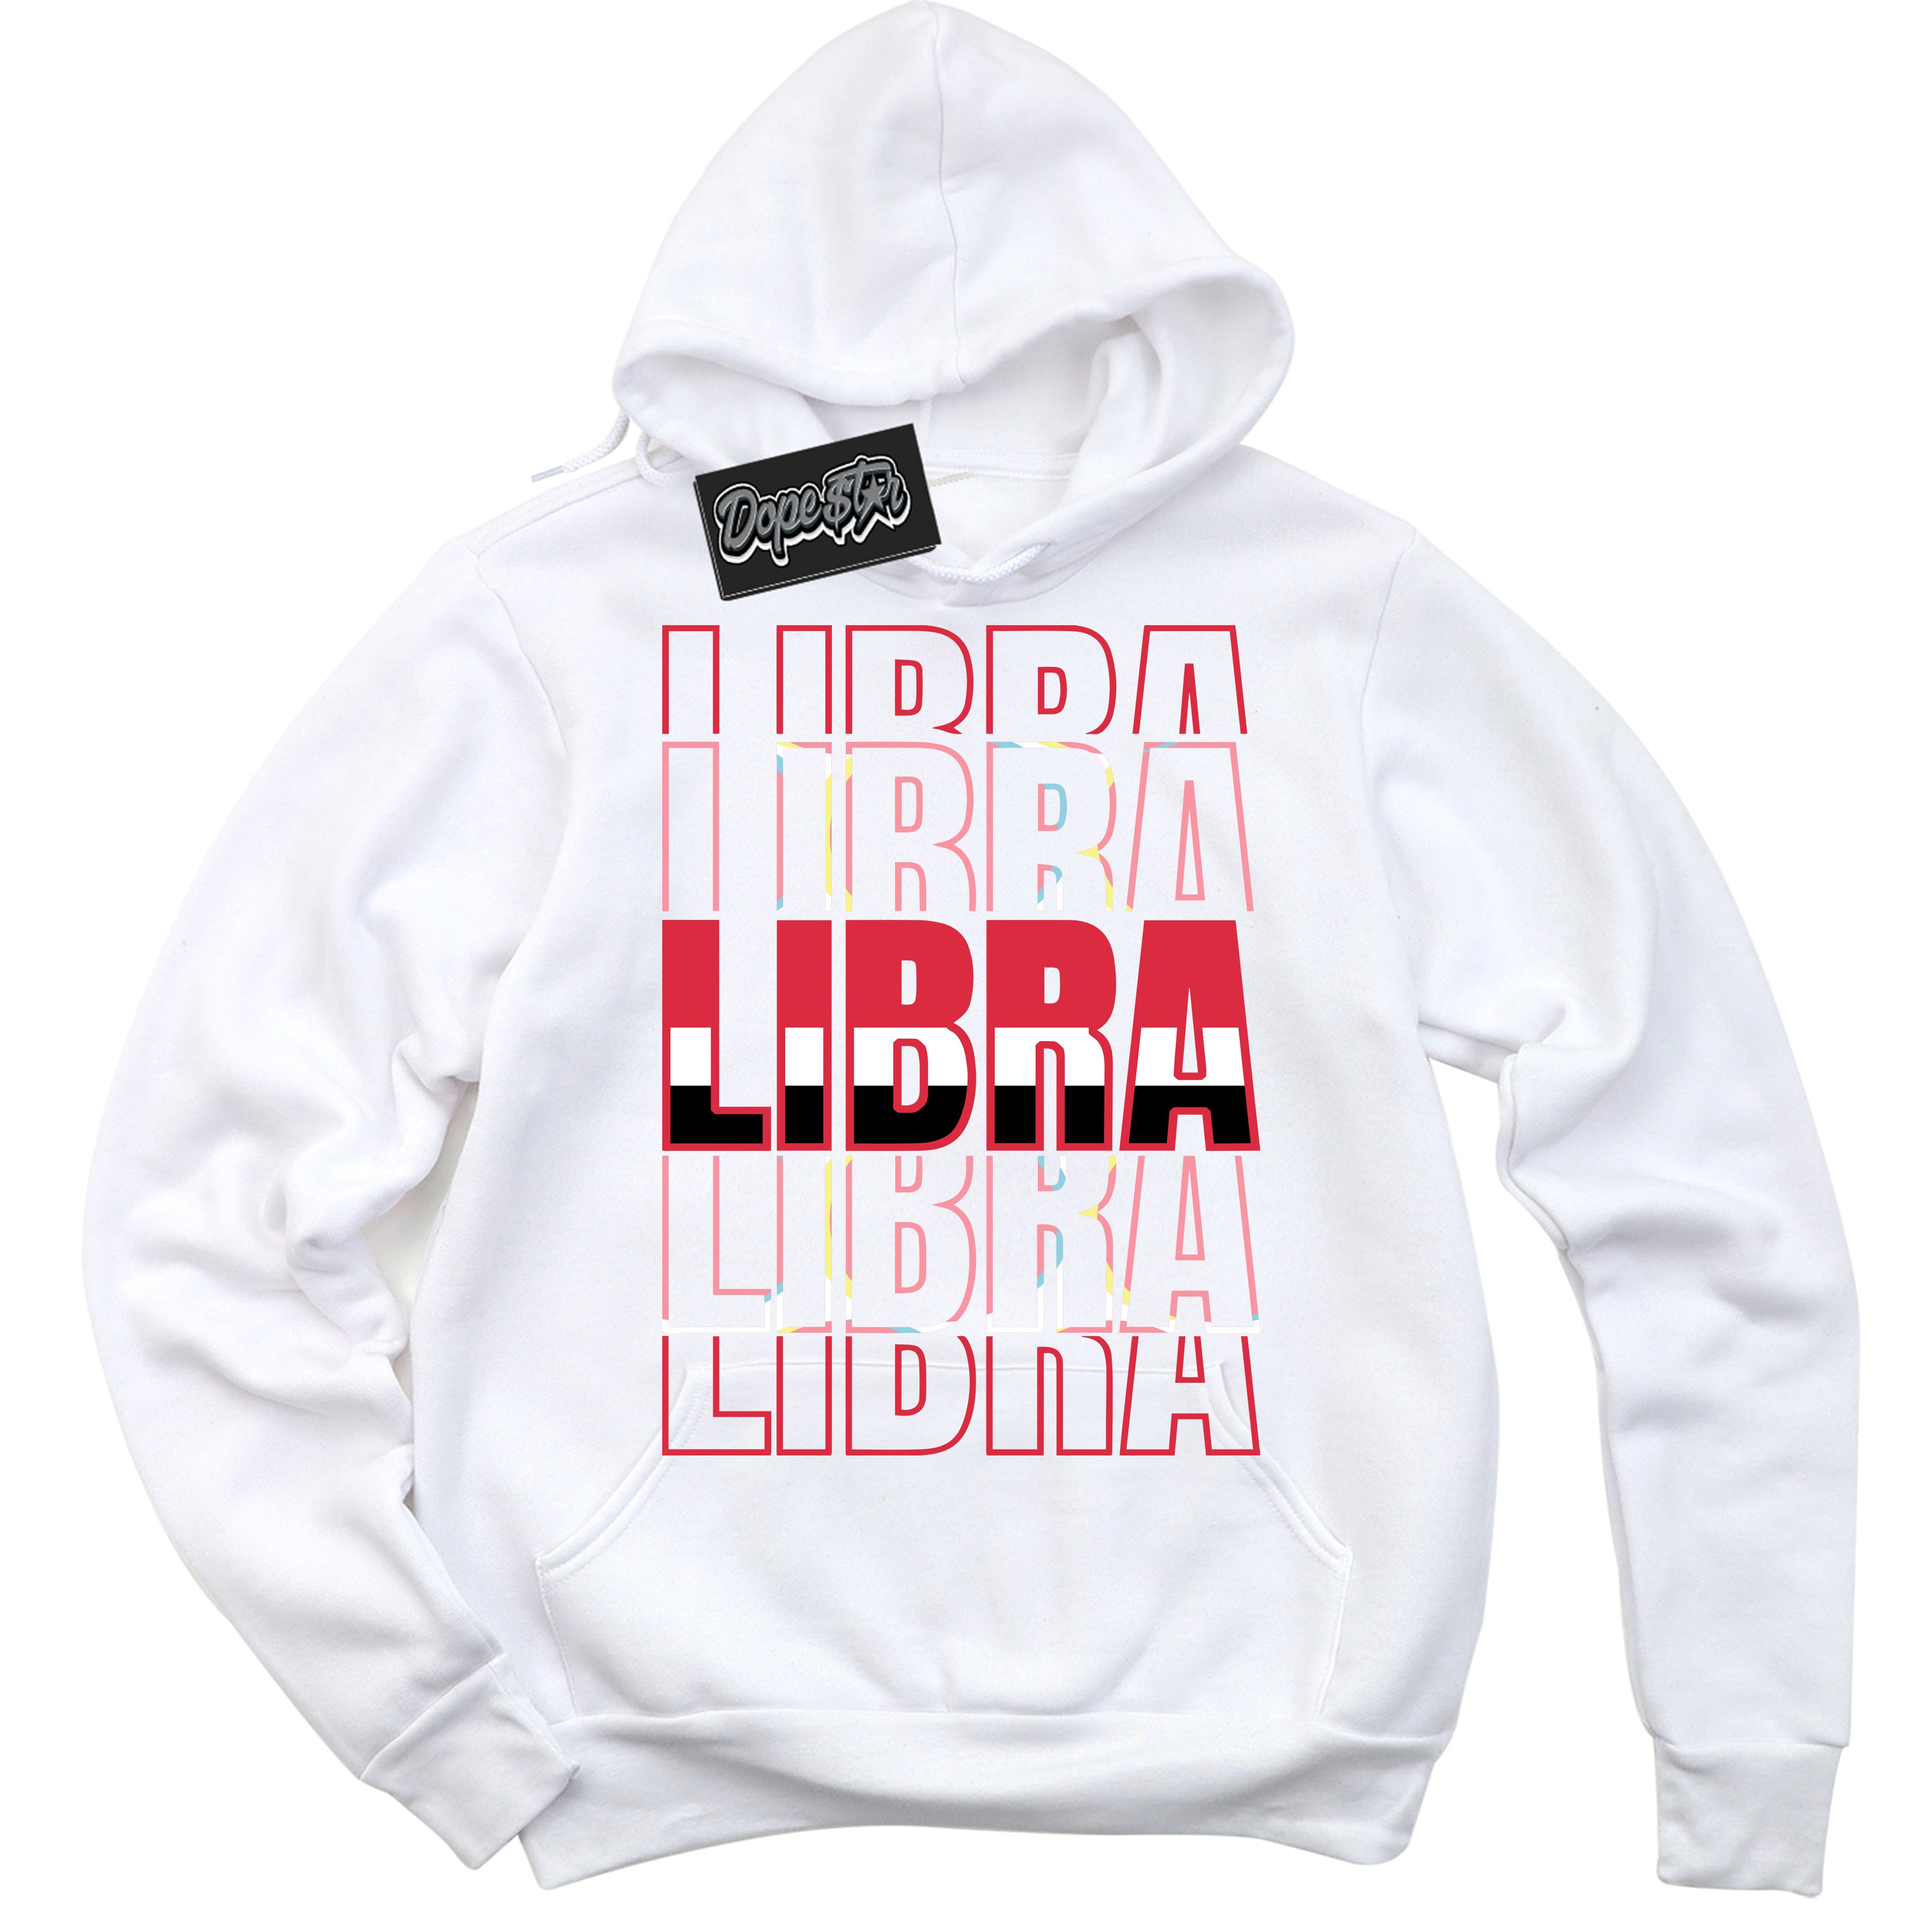 Cool White Graphic DopeStar Hoodie with “ Libra “ print, that perfectly matches Spider-Verse 1s sneakers